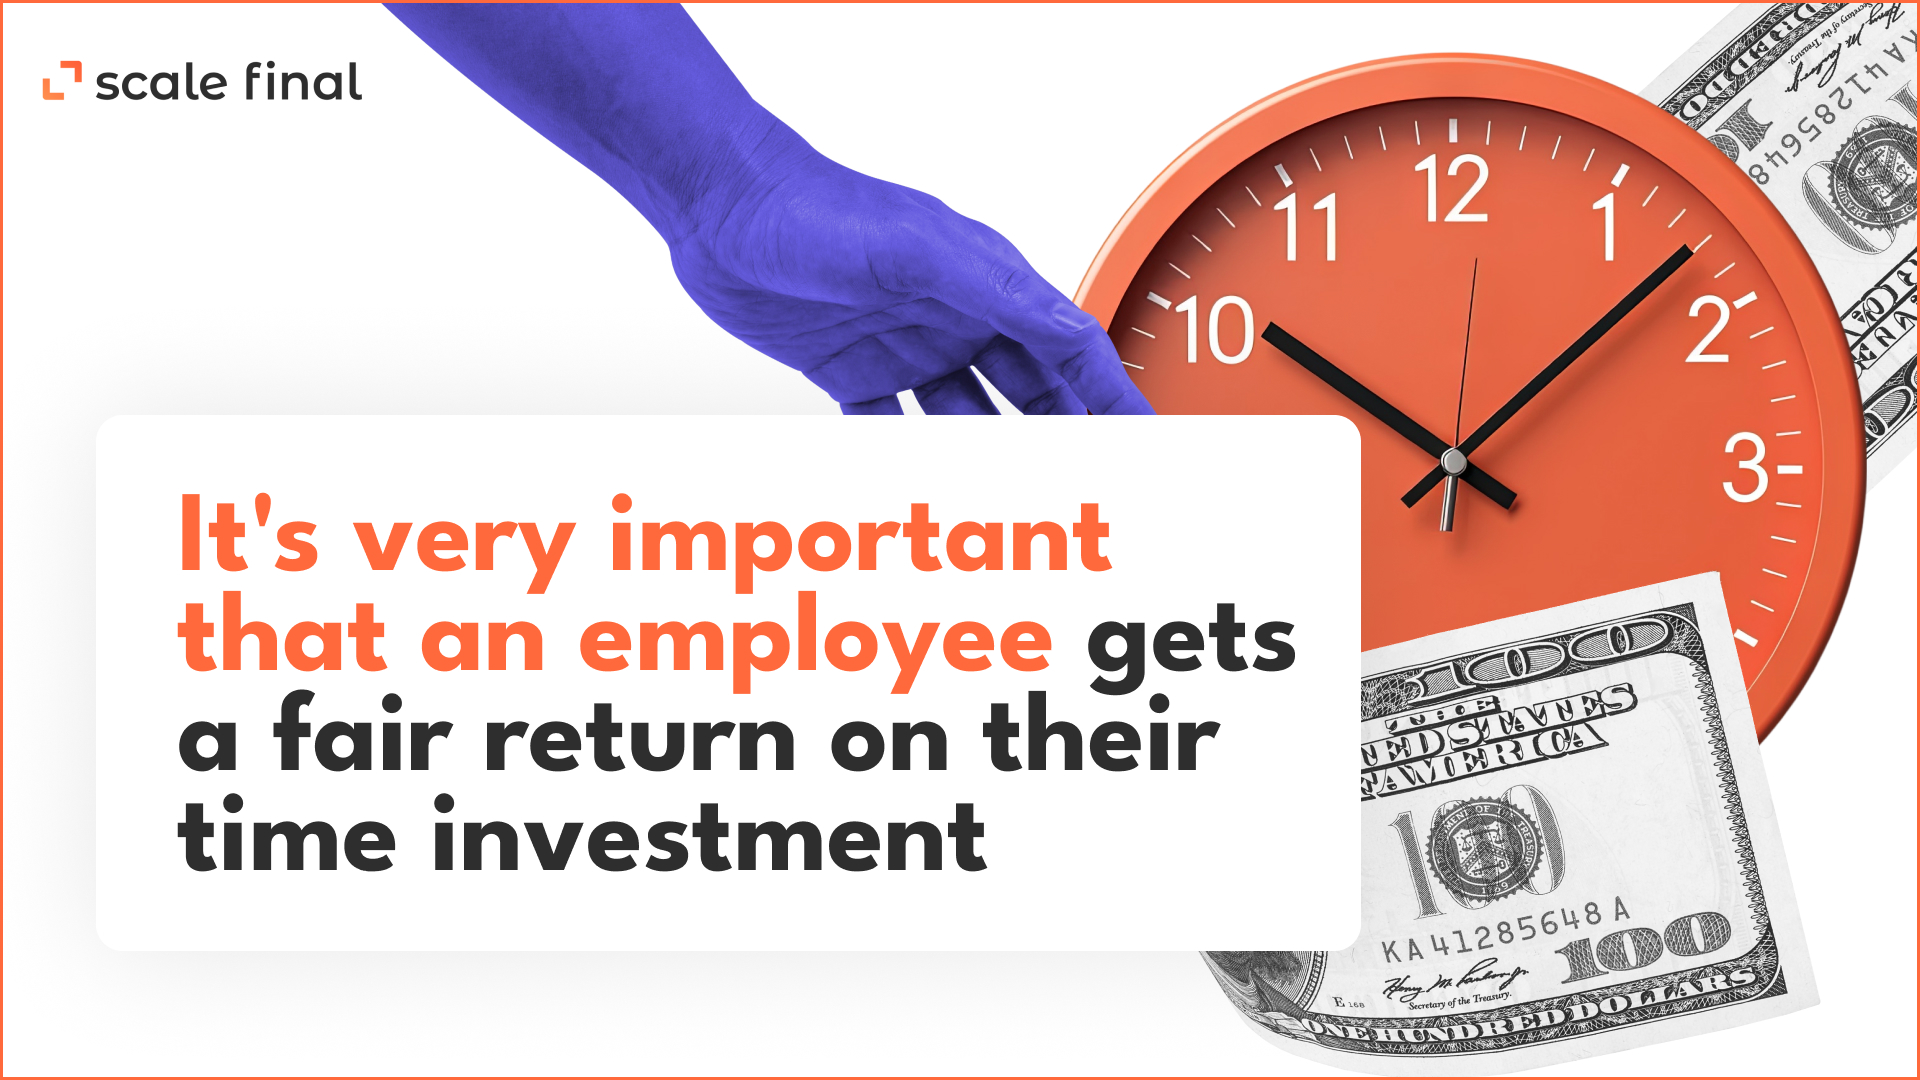  It's very important that an employee gets a fair return on their time investment.